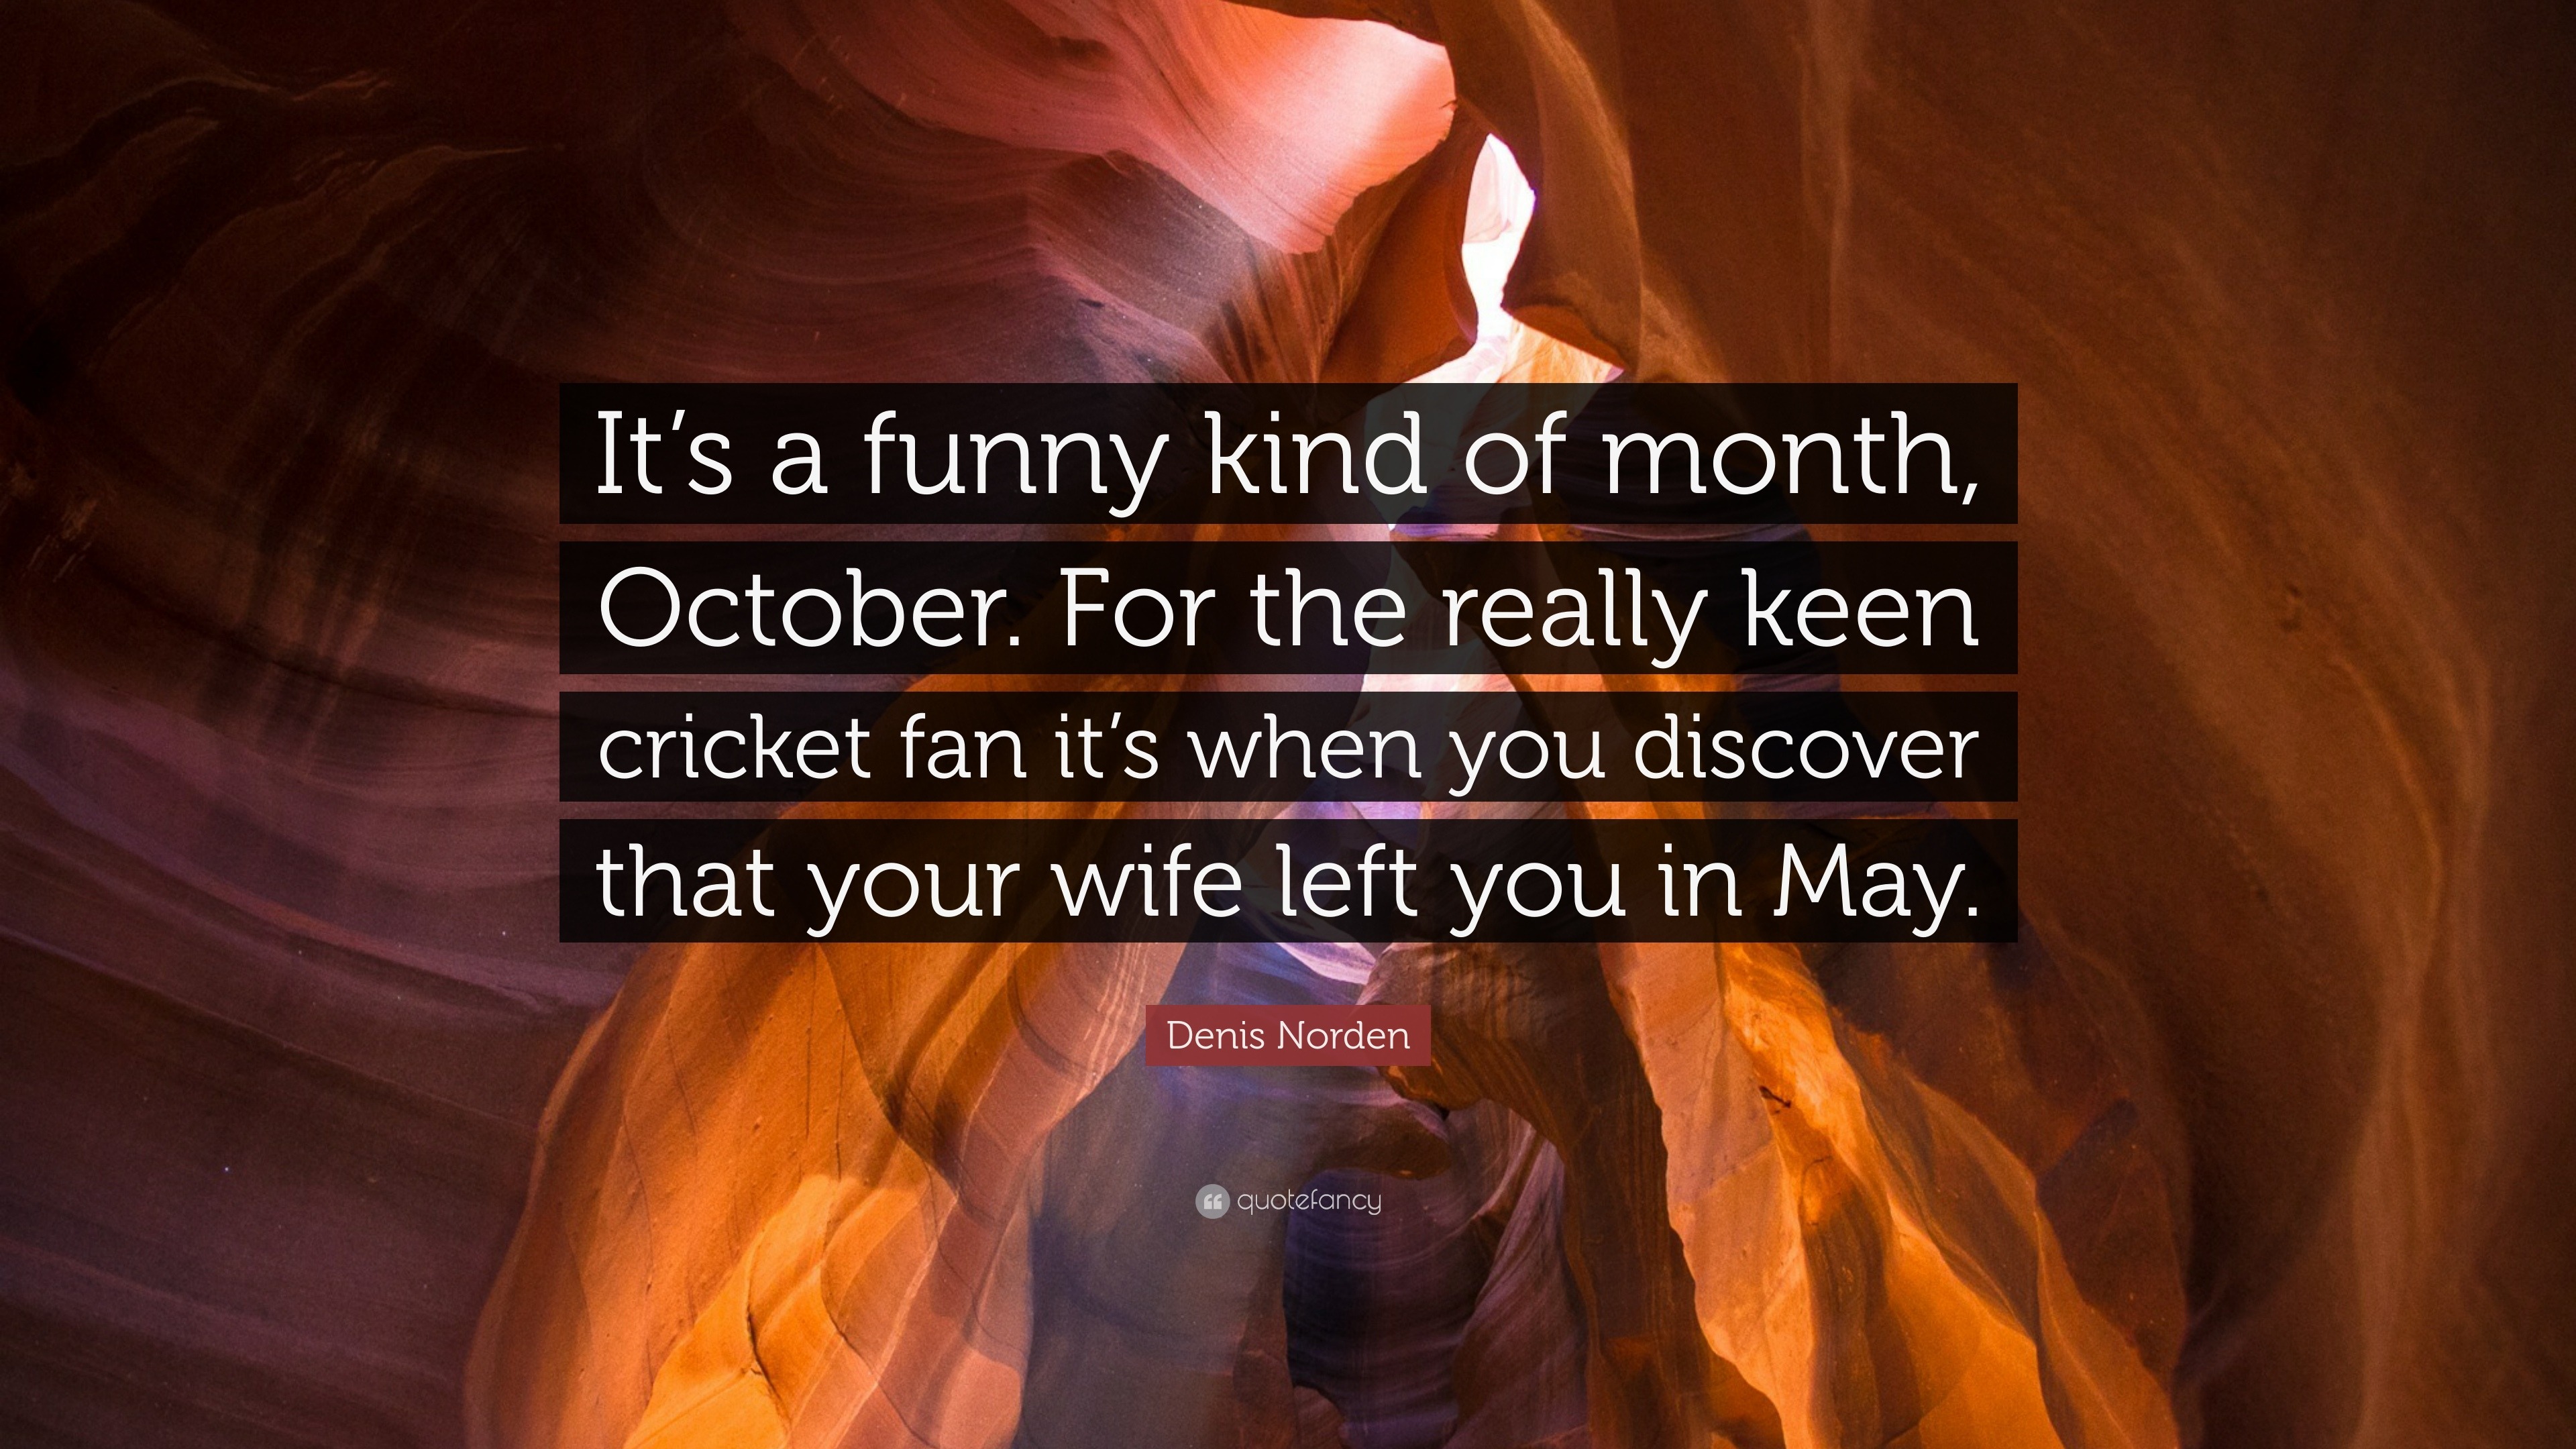 Denis Norden Quote: “It's a funny kind of month, October. For the really  keen cricket fan it's when you discover that your wife left you in M...”